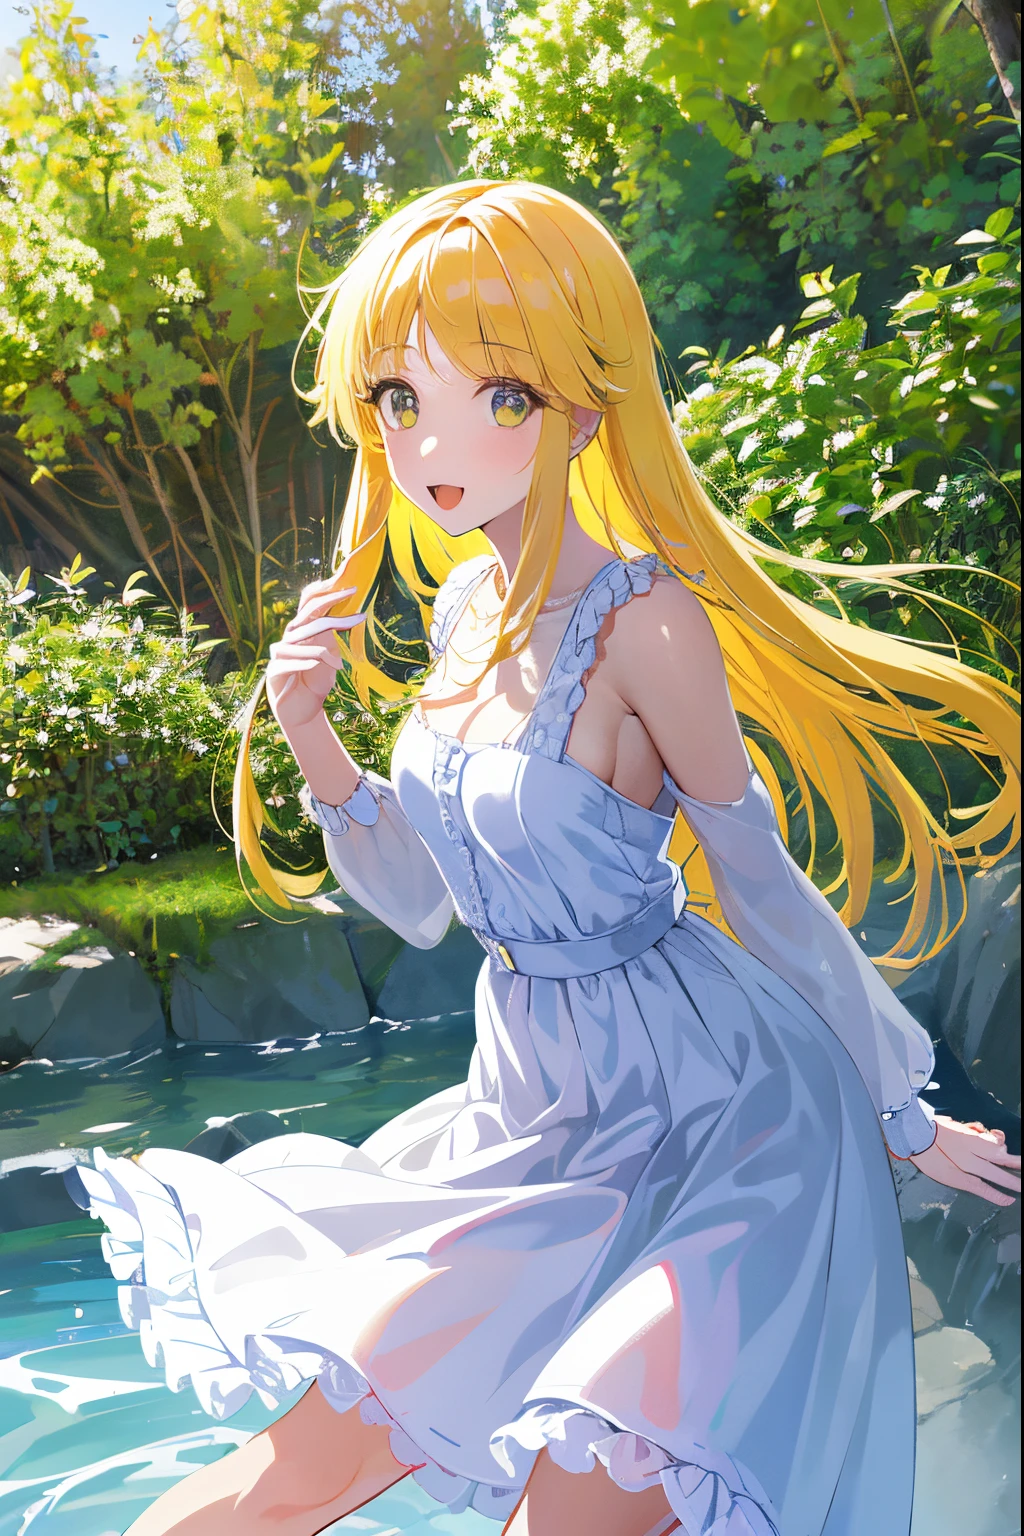 a girl Koikishi Kokoro,in a garden,painting,oil painting,full of flowers,with a flowing river,under the shade of tall trees,with sunlight filtering through the leaves,emphasizing her delicate features,beautiful detailed eyes,beautiful detailed lips,extremely detailed eyes and face,long eyelashes,her hair blowing in the breeze,expressing a serene and peaceful expression,on the verge of singing, wearing a flowing dress, with vibrant colors, capturing her vibrant energy and joy, high quality, 4k resolution, ultra-detailed, photo-realistic, with vivid and vibrant colors, vibrant and warm color tones, with soft and warm lighting.